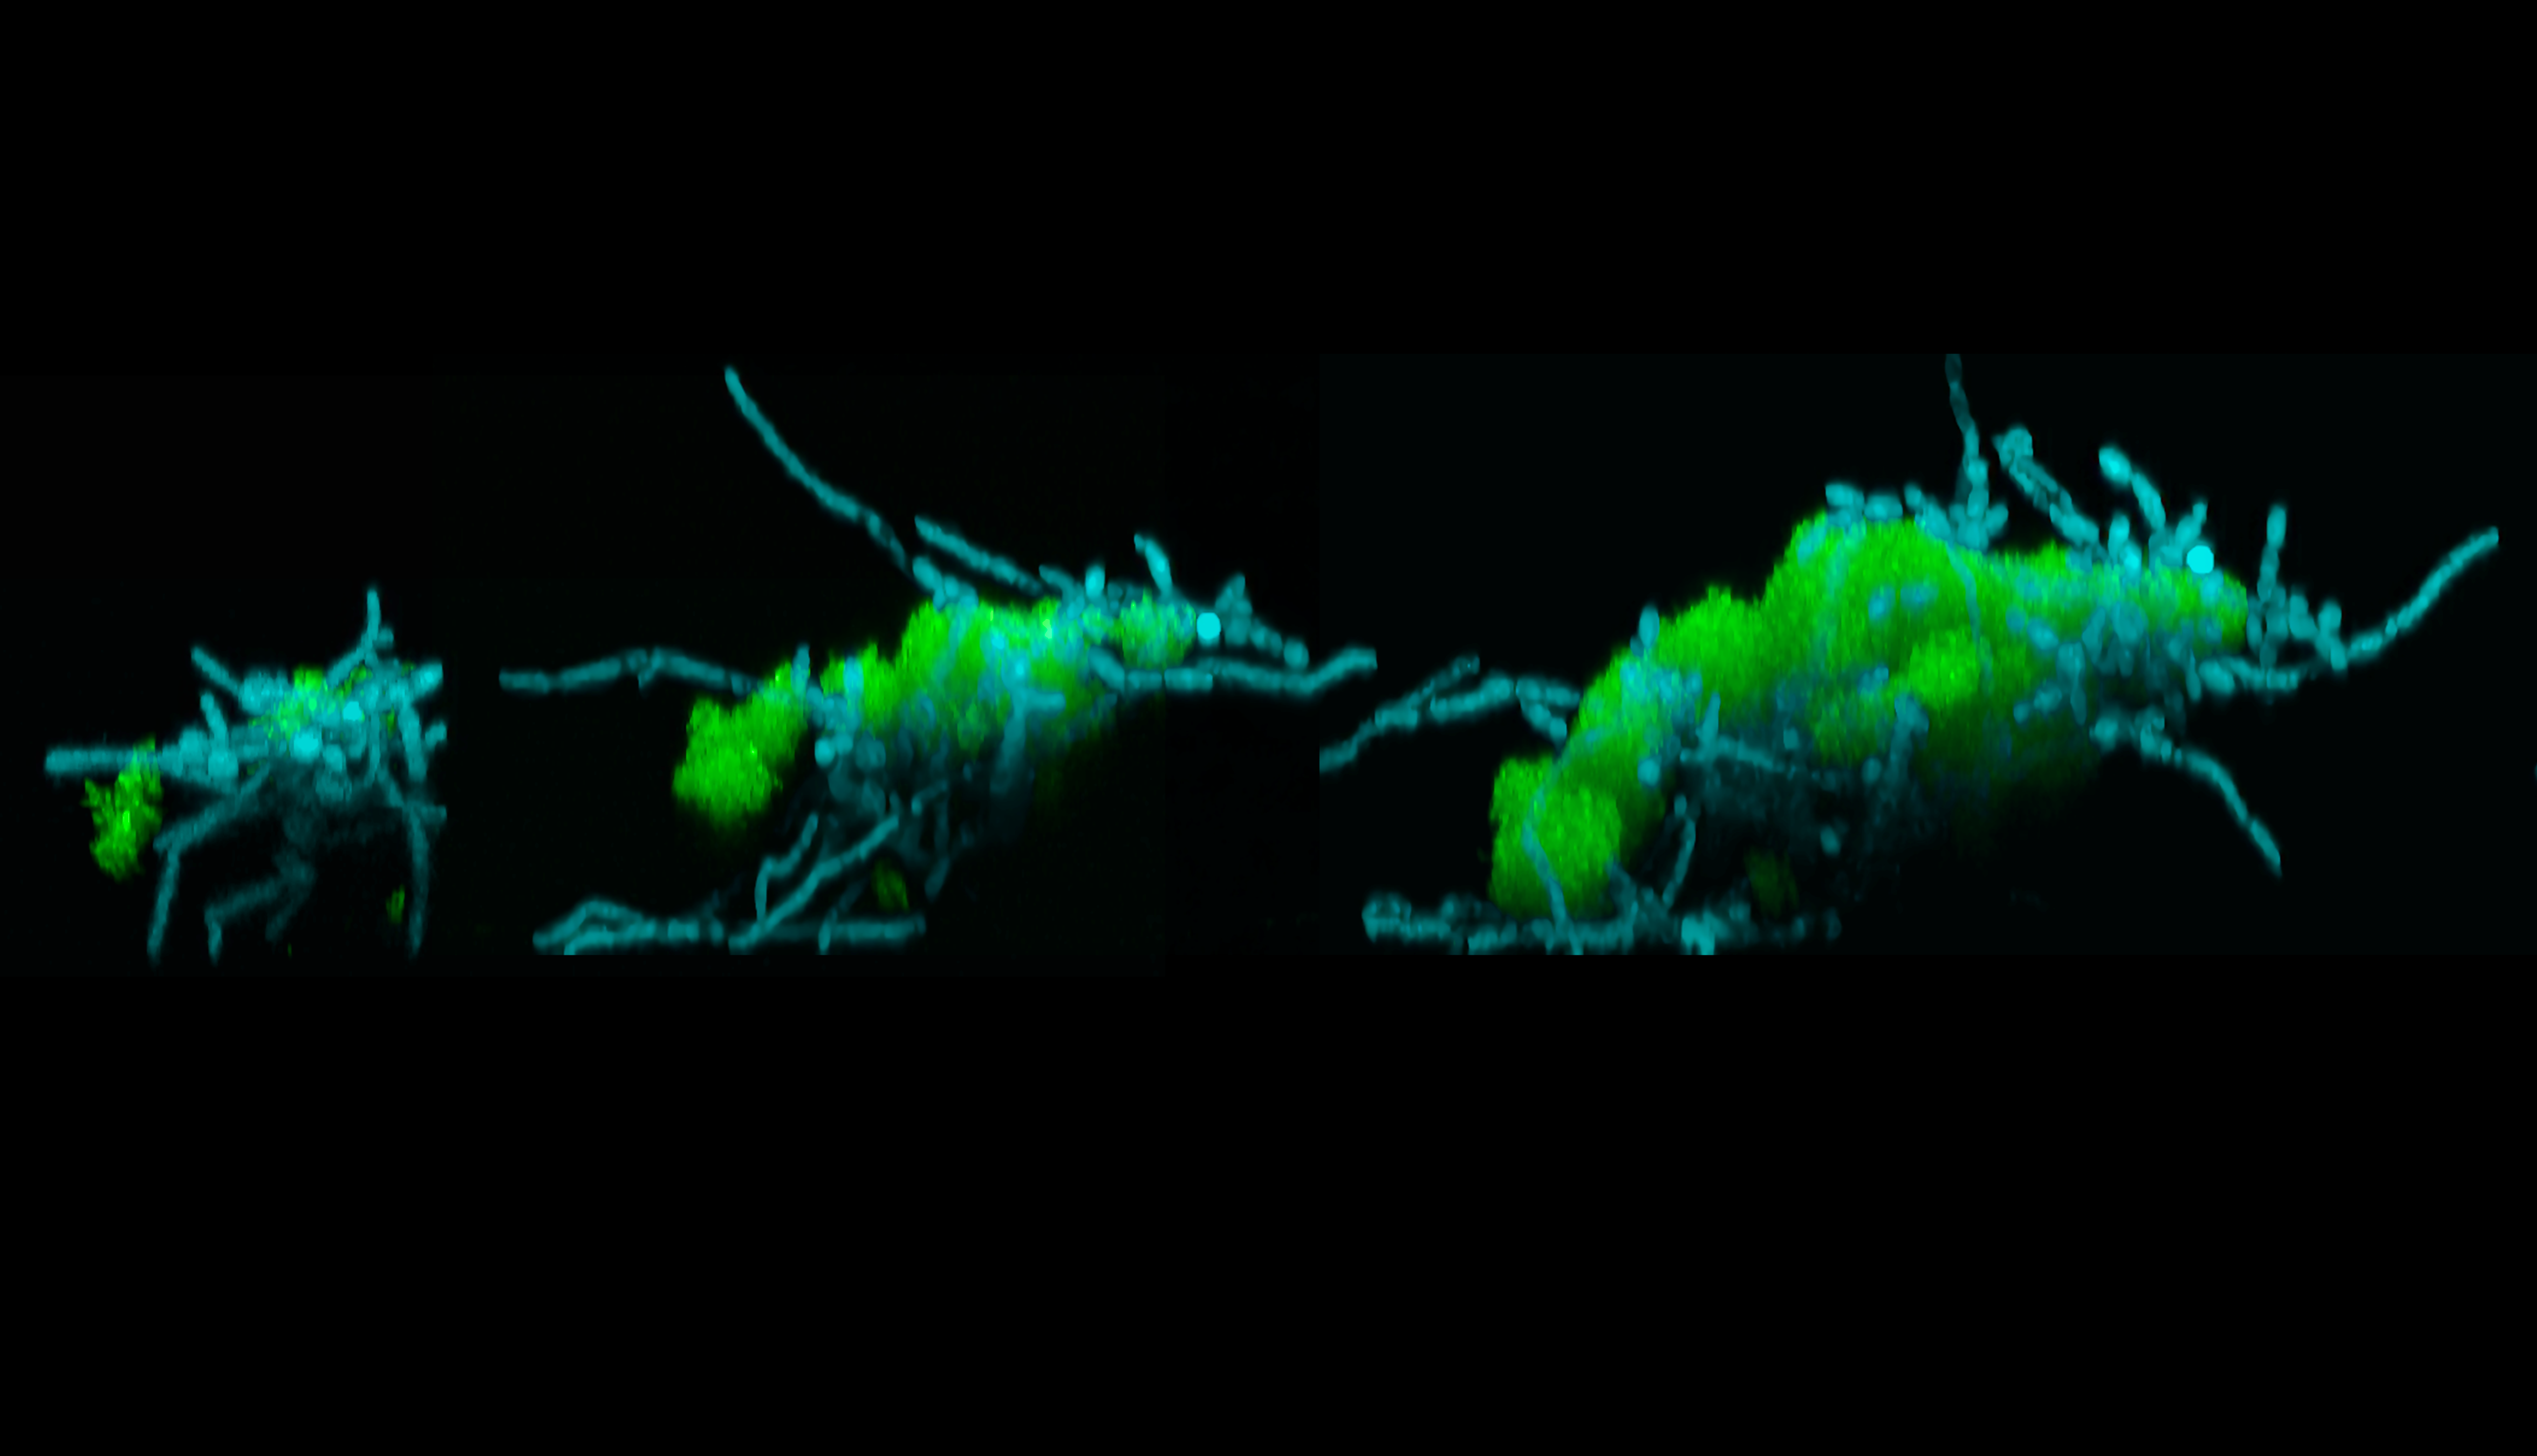 Three microscopic images labeled in green and blue show a group of microbes changing shape and moving